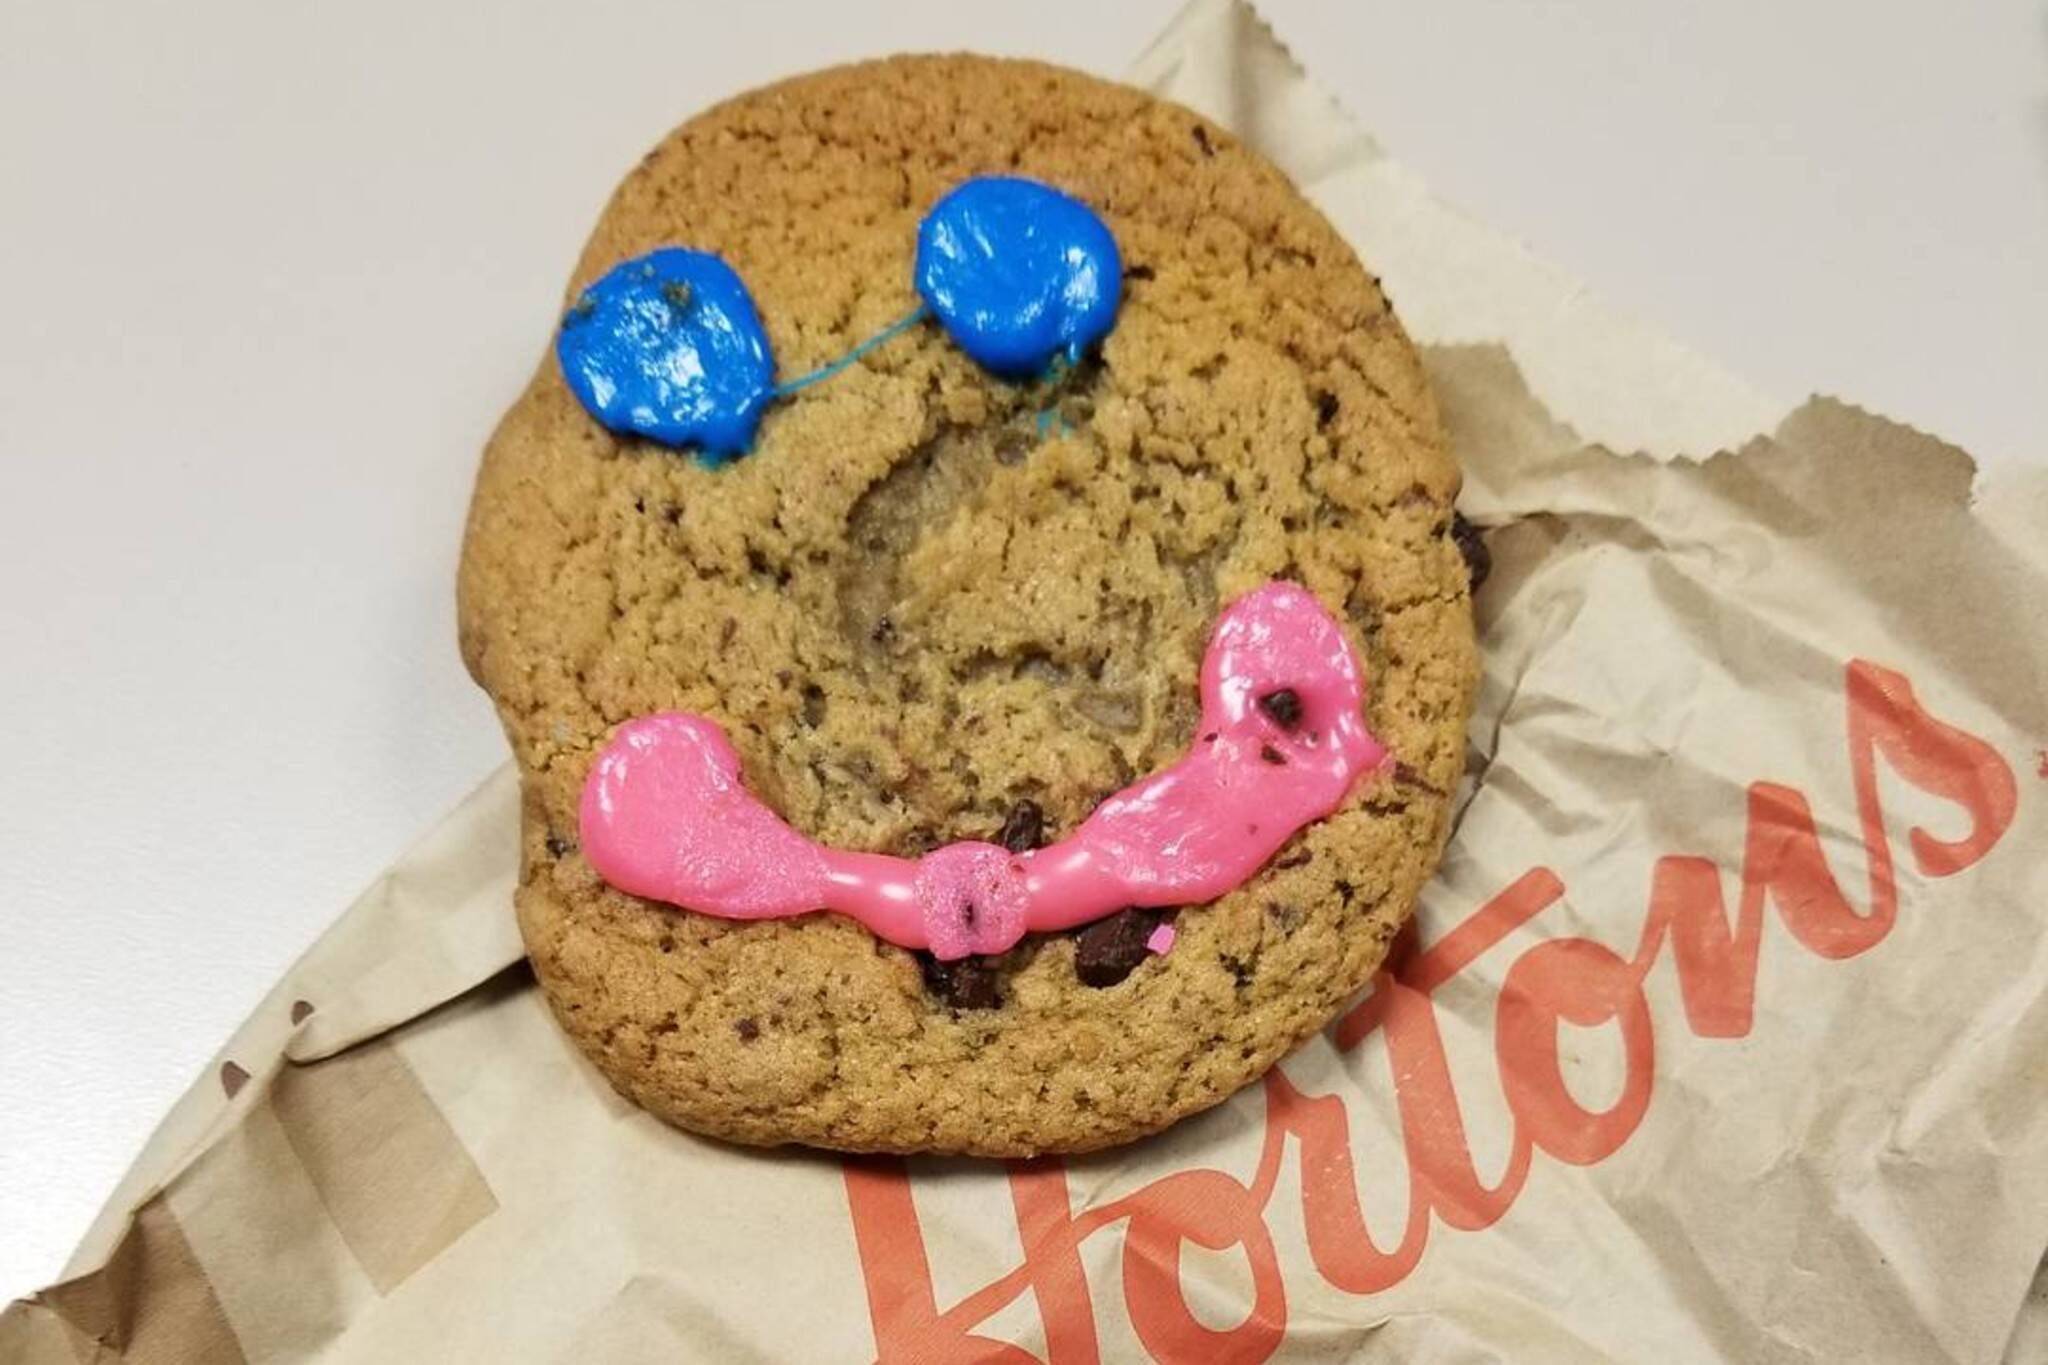 Tim Hortons will let customers their own custom smile cookies in Toronto